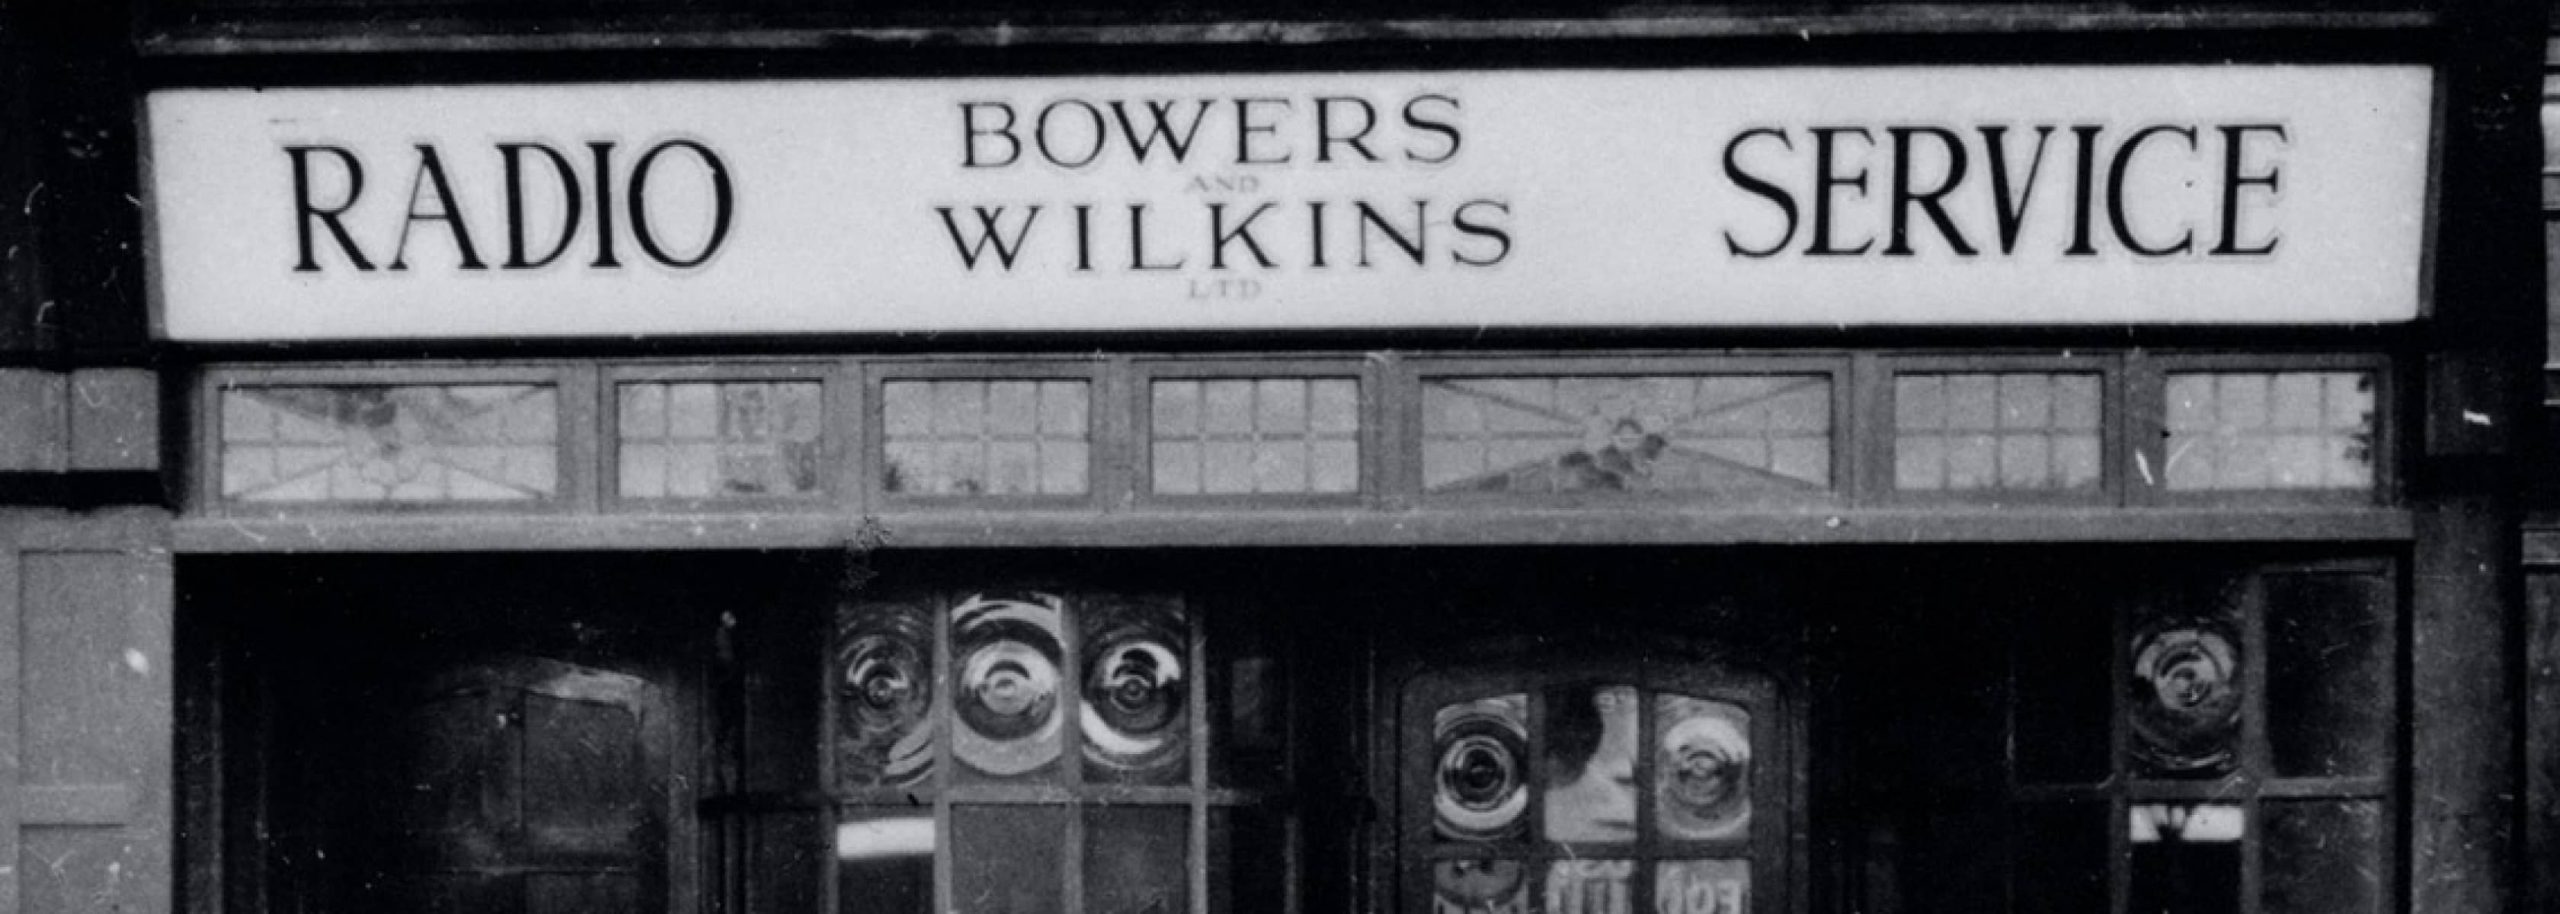 Knowledge is Bowers: Wilkins in the Footsteps of Giants